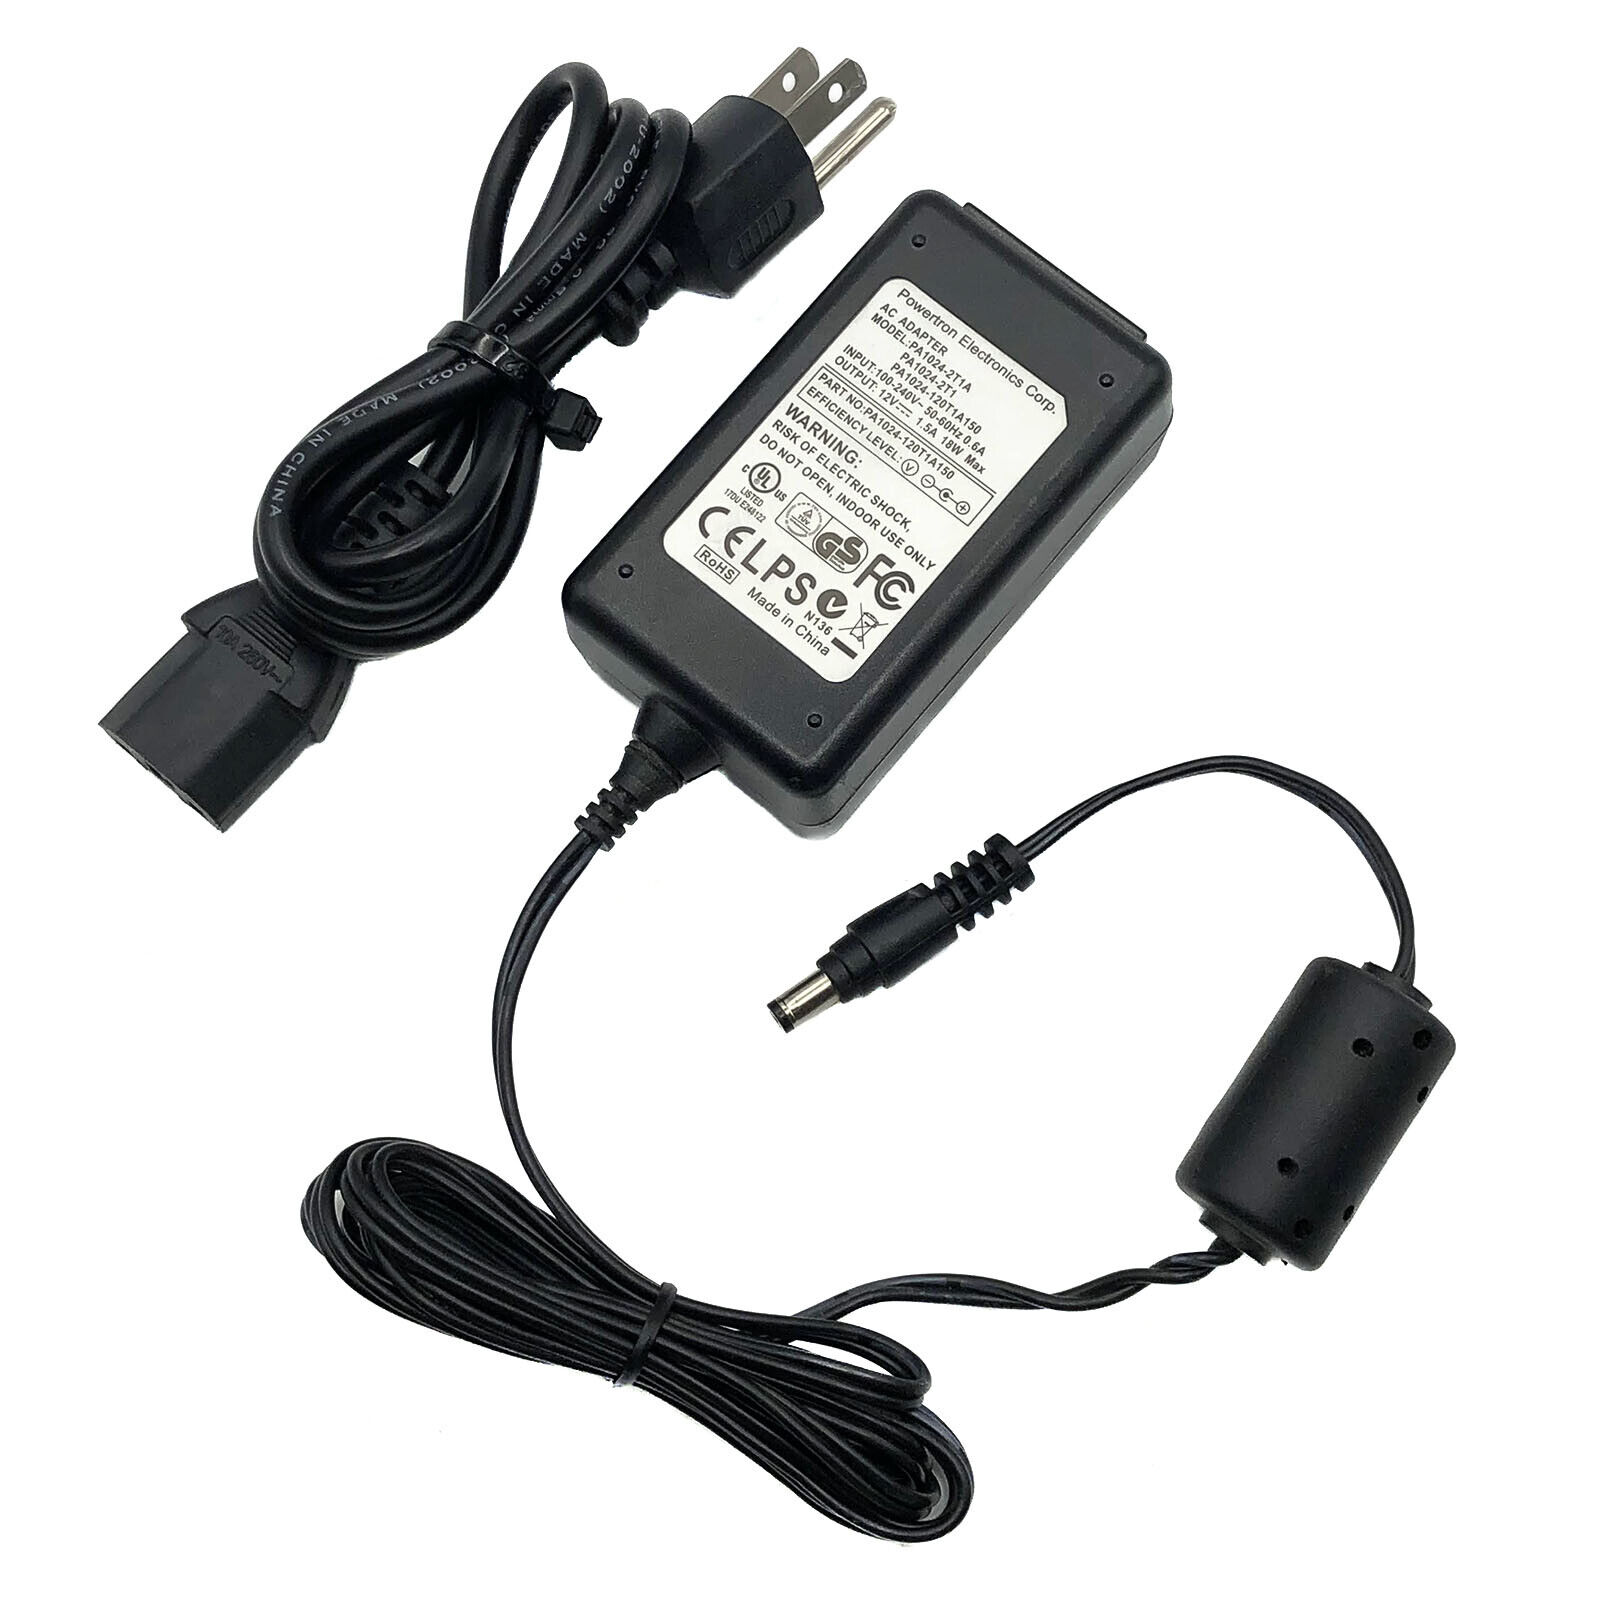 *Brand NEW*Powertron 12V 1.5A 18W AC Adapter PA1024-2T1A PA1024-2T1 PA1024-120T1A150 for Casio WK-65